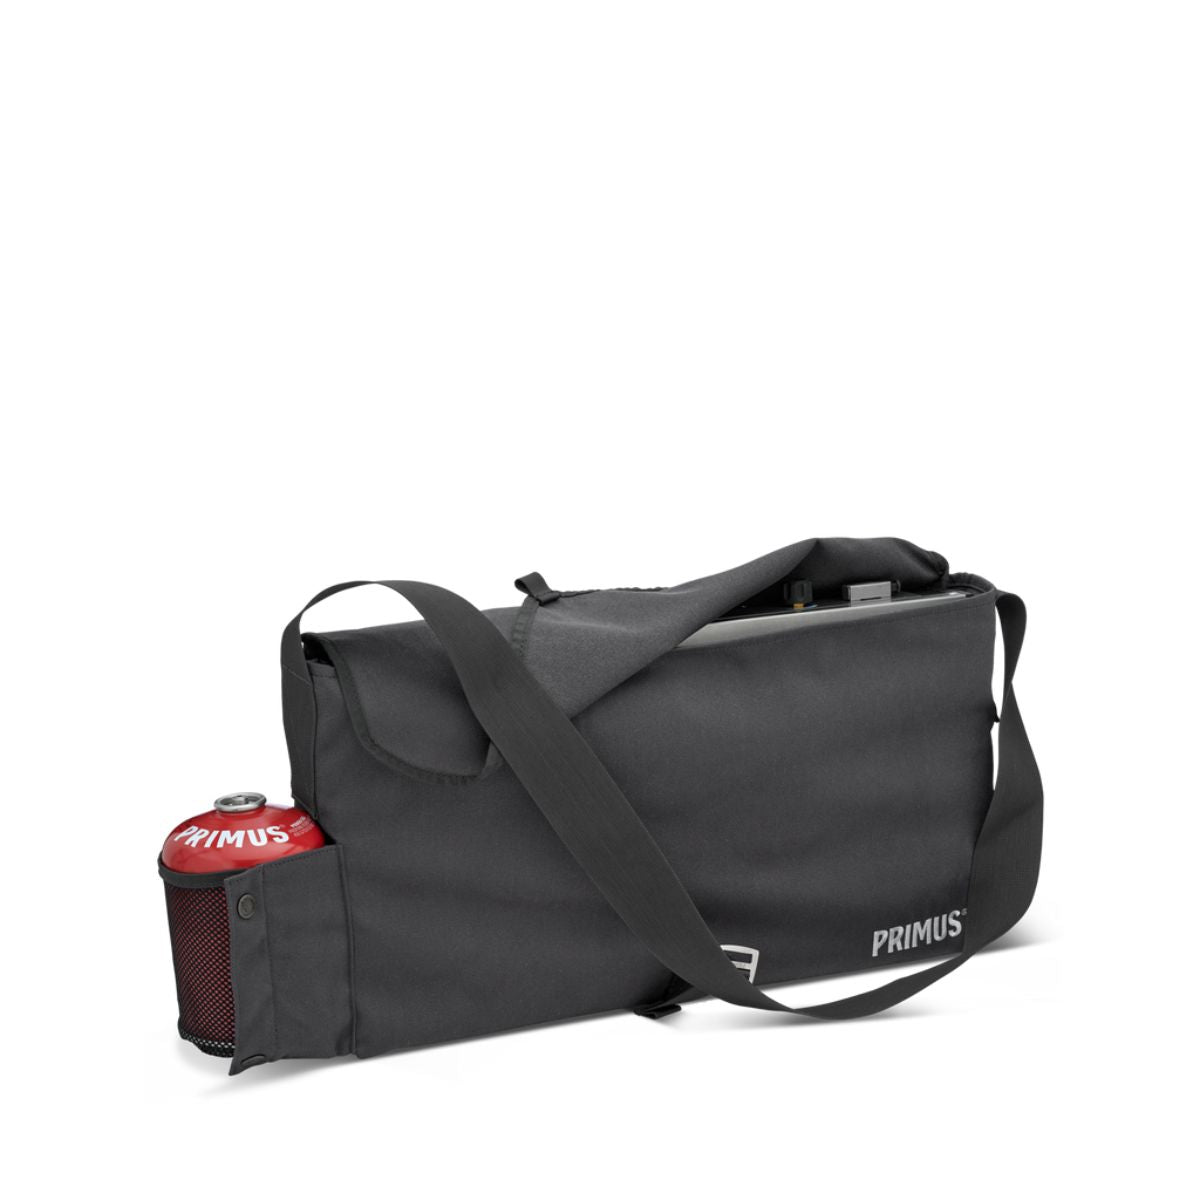 Primus Double Burner Stove Carry Bag